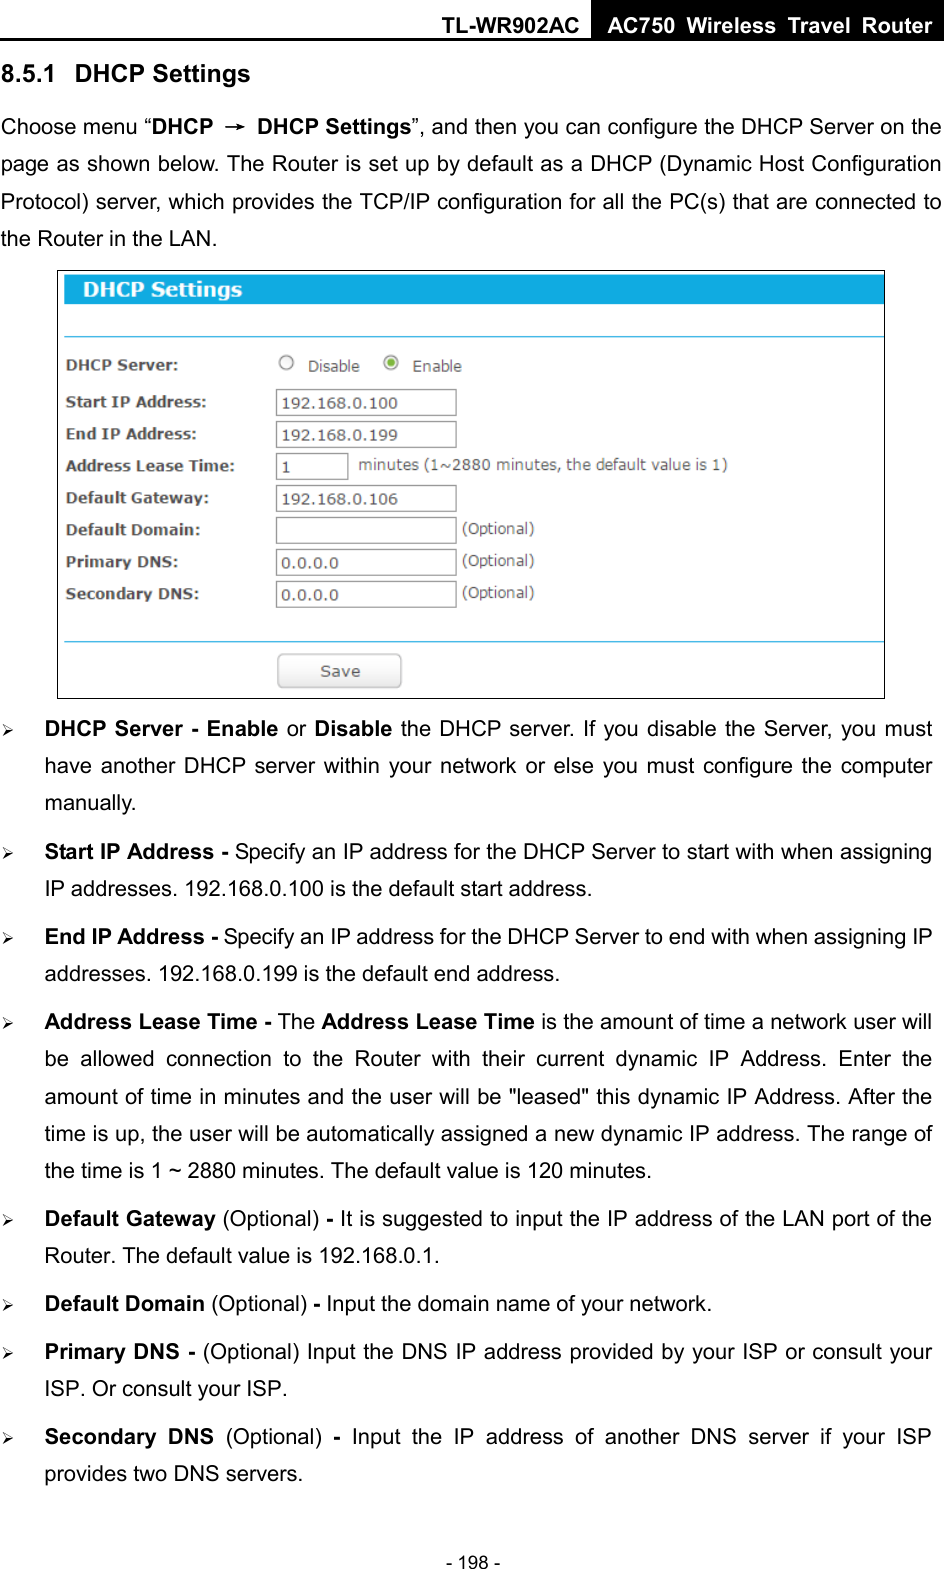 TL-WR902AC AC750  Wireless Travel Router  - 198 - 8.5.1 DHCP Settings Choose menu “DHCP → DHCP Settings”, and then you can configure the DHCP Server on the page as shown below. The Router is set up by default as a DHCP (Dynamic Host Configuration Protocol) server, which provides the TCP/IP configuration for all the PC(s) that are connected to the Router in the LAN.     DHCP Server - Enable or Disable the DHCP server. If you disable the Server, you must have another DHCP server within your network or else you must configure the computer manually.  Start IP Address - Specify an IP address for the DHCP Server to start with when assigning IP addresses. 192.168.0.100 is the default start address.  End IP Address - Specify an IP address for the DHCP Server to end with when assigning IP addresses. 192.168.0.199 is the default end address.  Address Lease Time - The Address Lease Time is the amount of time a network user will be allowed connection to the Router with their current dynamic IP Address. Enter the amount of time in minutes and the user will be &quot;leased&quot; this dynamic IP Address. After the time is up, the user will be automatically assigned a new dynamic IP address. The range of the time is 1 ~ 2880 minutes. The default value is 120 minutes.  Default Gateway (Optional) - It is suggested to input the IP address of the LAN port of the Router. The default value is 192.168.0.1.  Default Domain (Optional) - Input the domain name of your network.  Primary DNS - (Optional) Input the DNS IP address provided by your ISP or consult your ISP. Or consult your ISP.  Secondary DNS (Optional)  -  Input the IP address of another DNS server if your ISP provides two DNS servers. 